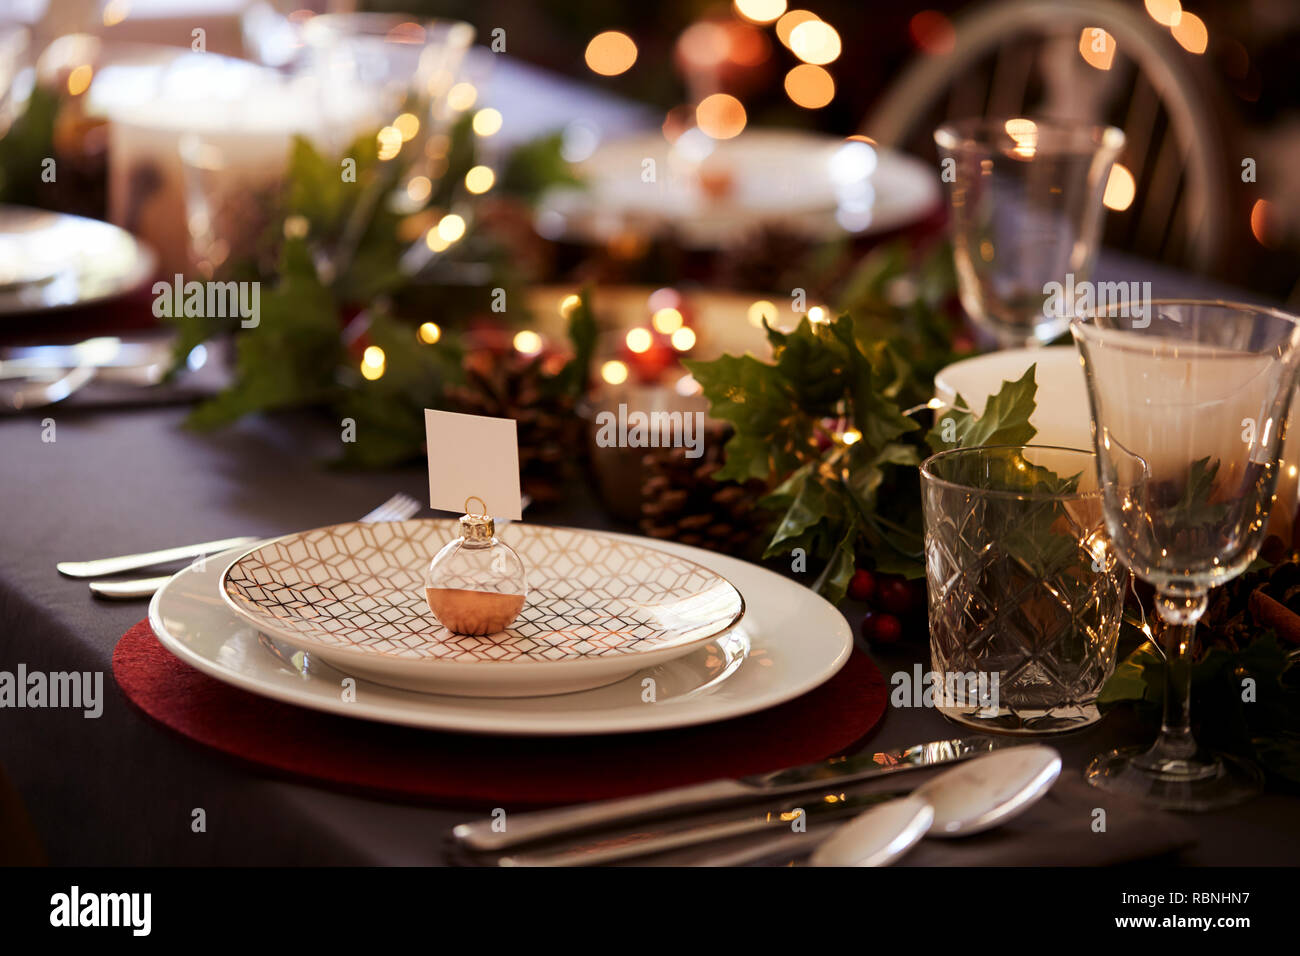 Christmas table setting with bauble name card holder arranged on a plate and green and red table decorations Stock Photo